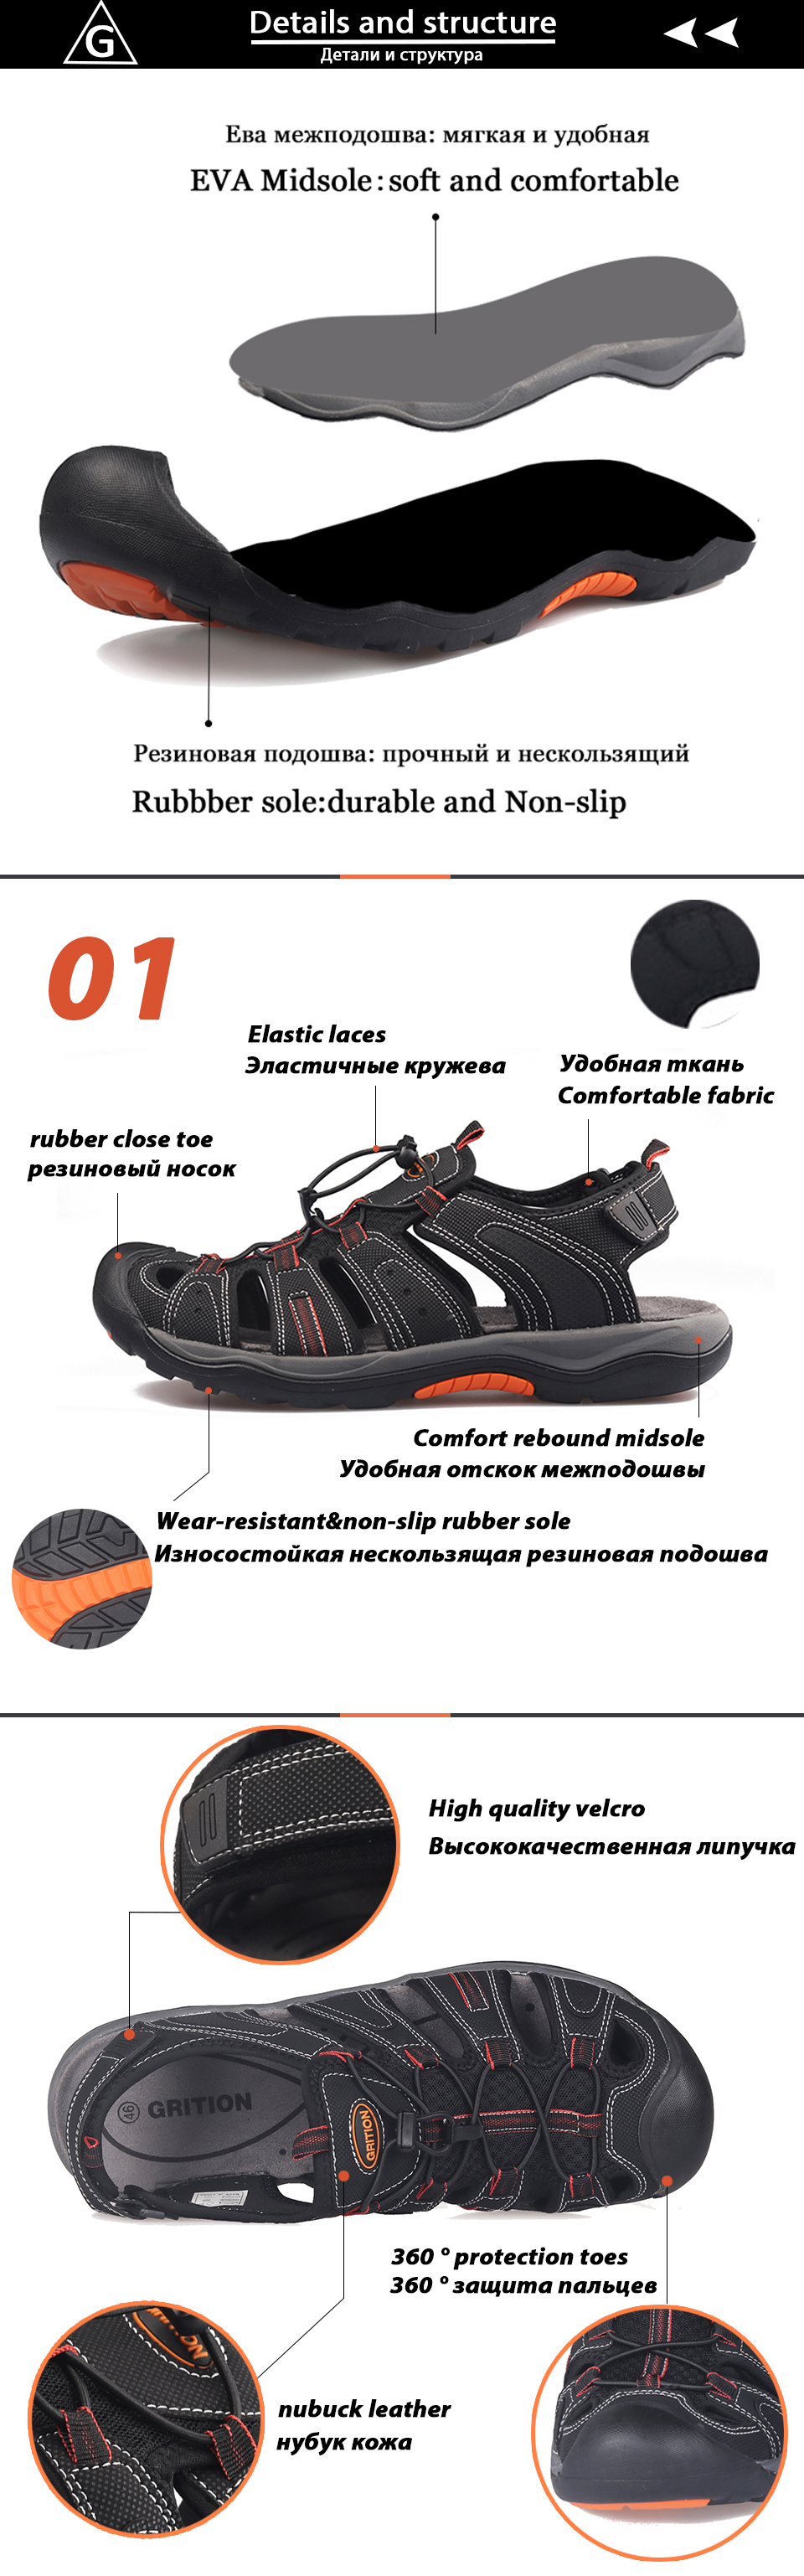 GRITION Men Sandals Summer Close Toe Beach Clog Flat Outdoor Casual Native Shoes PU Leather Luxury 2021 Fashion Flip Flops New